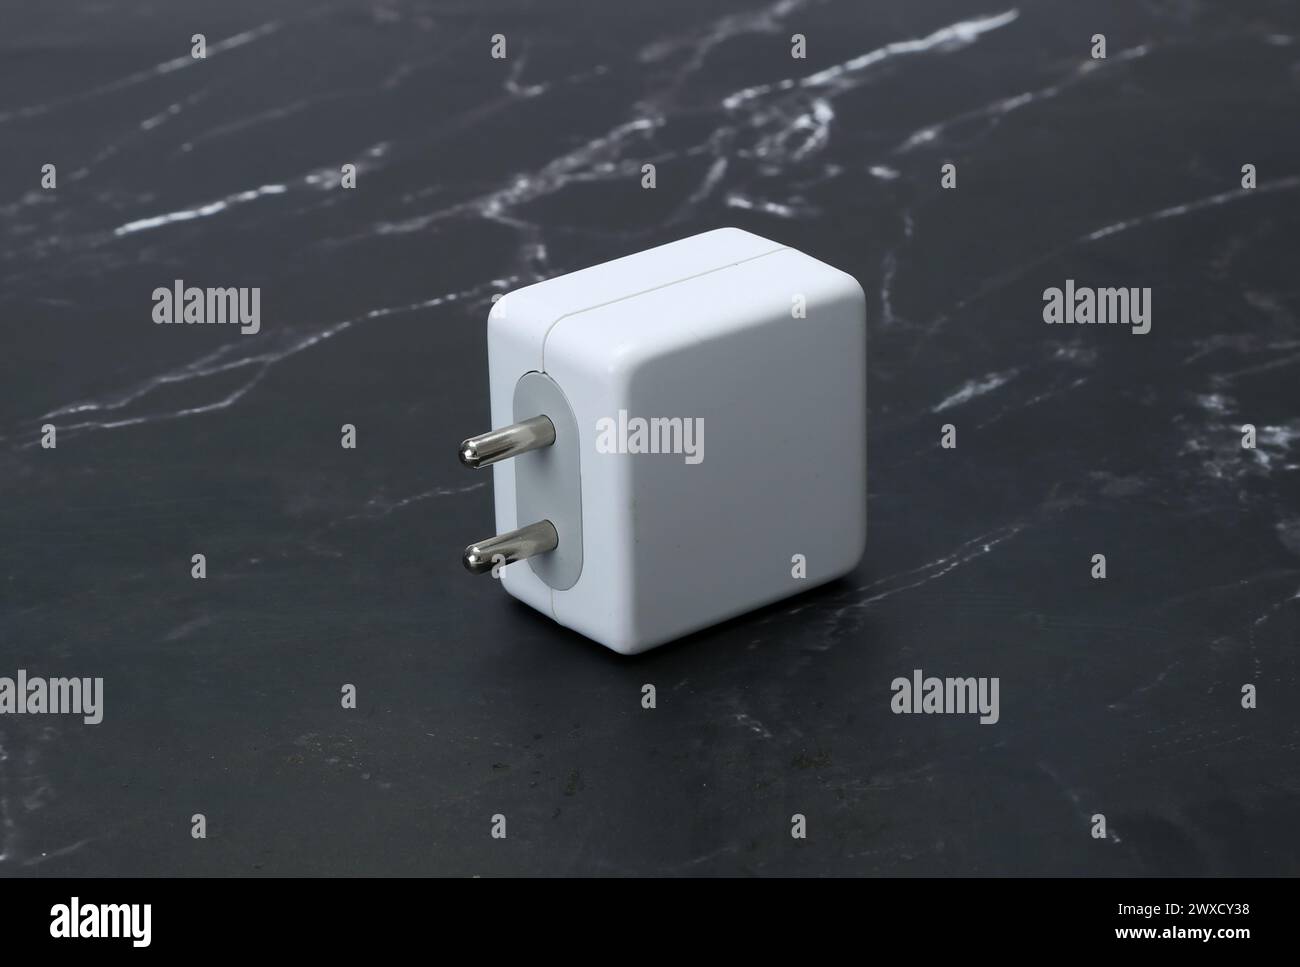 two pin smatphone white color charger isolated on black marble background Stock Photo